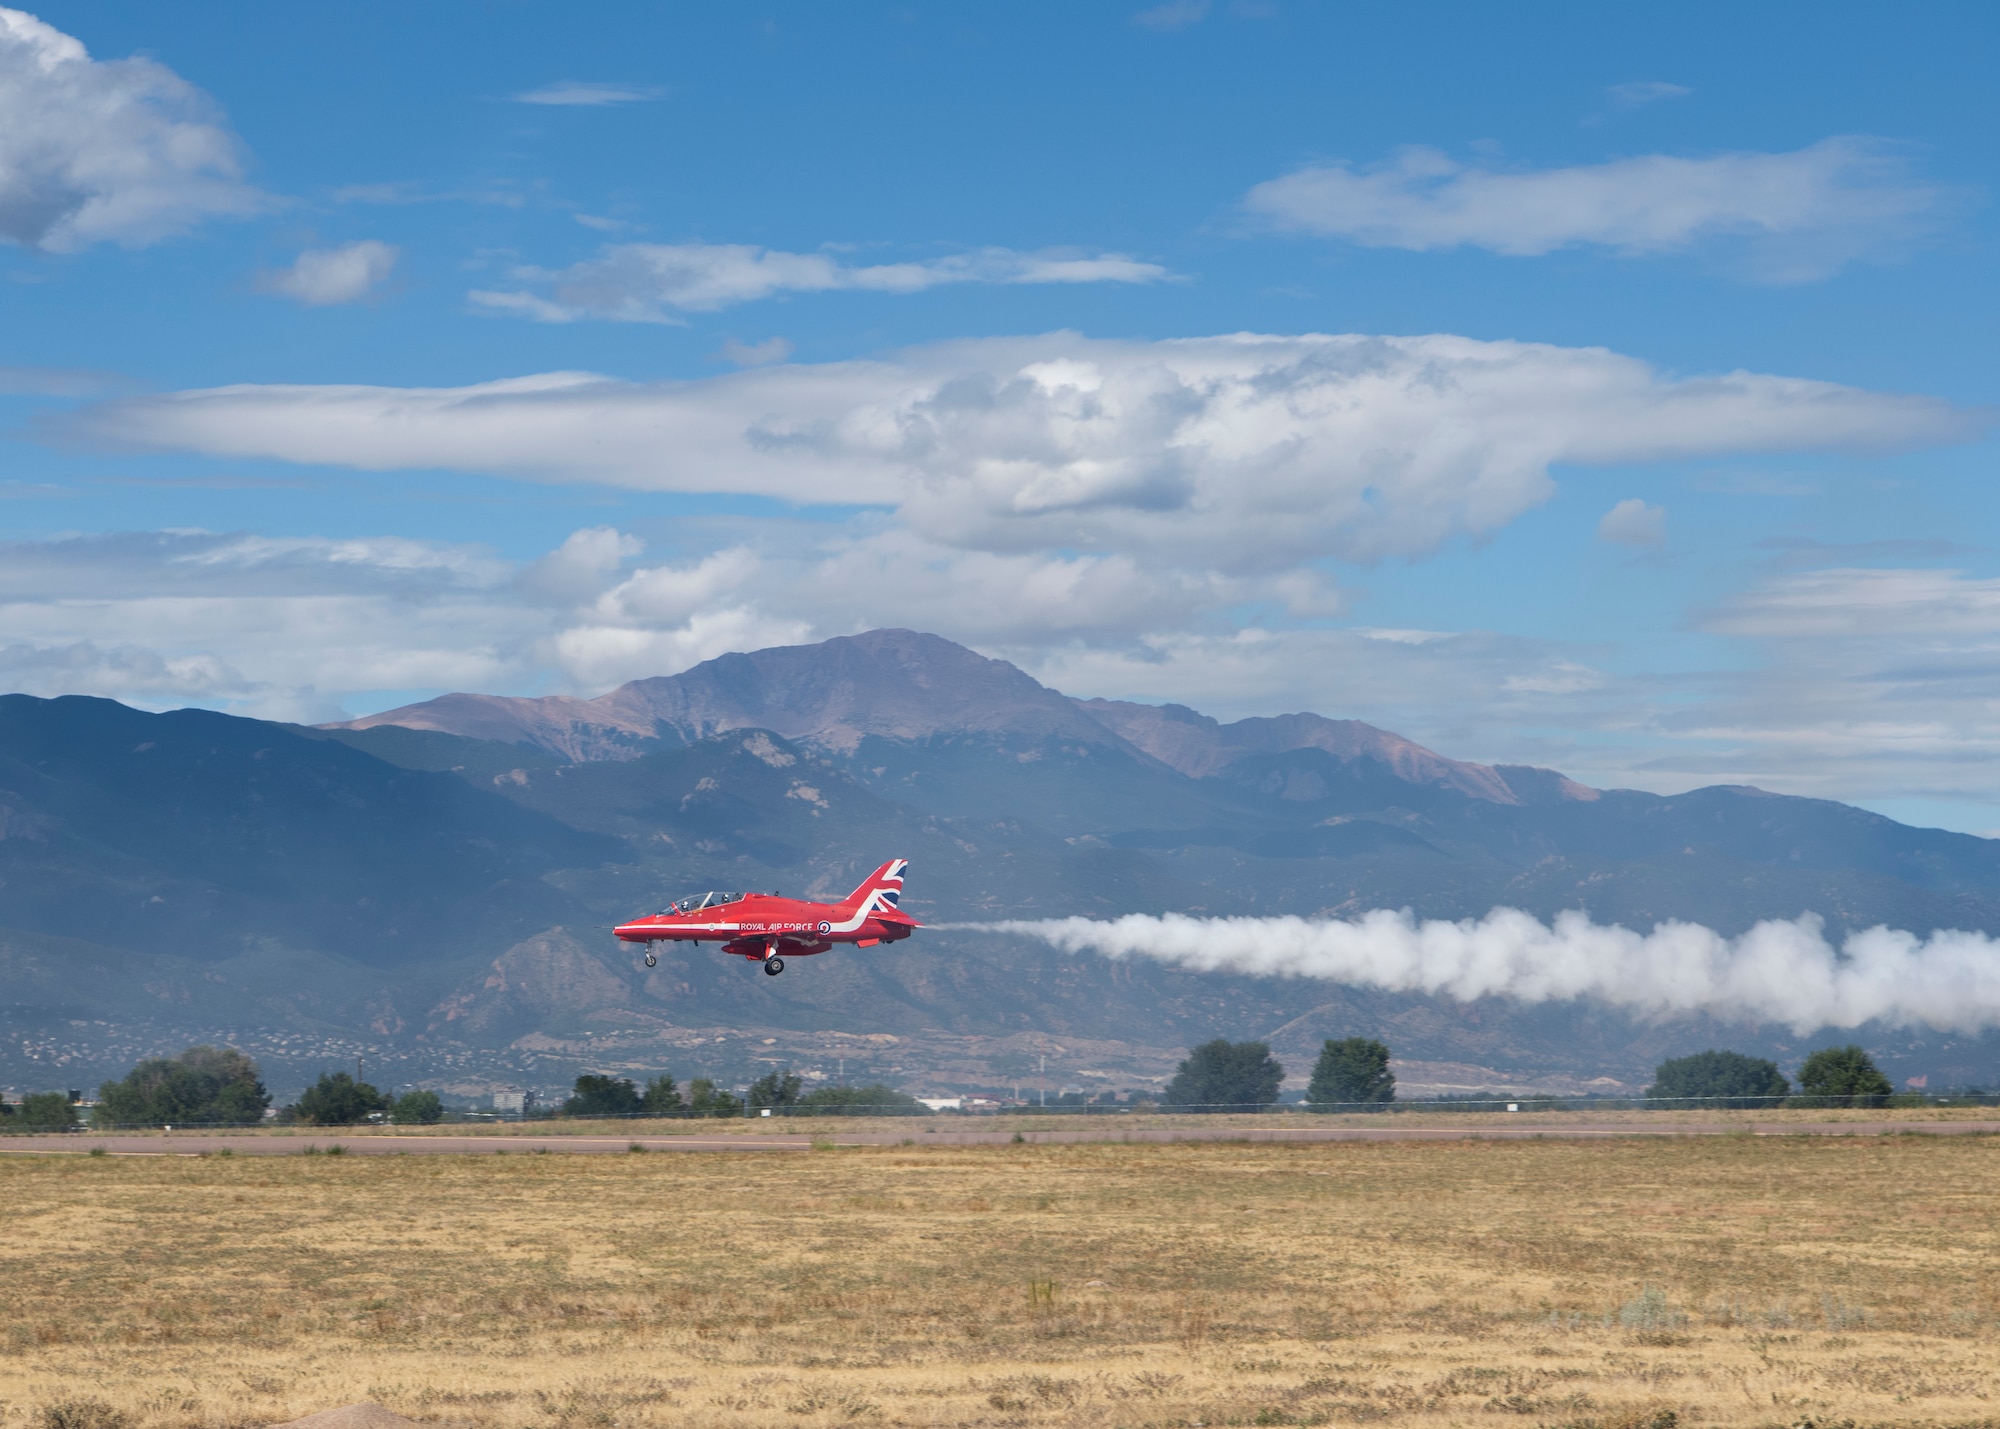 A pilot from the Royal Air Force aerial demonstration team, the Red Arrows, lands a Hawk T1 aircraft Sept. 16, 2019 at Peterson Air Force Base, Colorado. The demonstration team stopped at Peterson AFB as part of their North American tour. (U.S. Air Force photo by Heather Heiney)